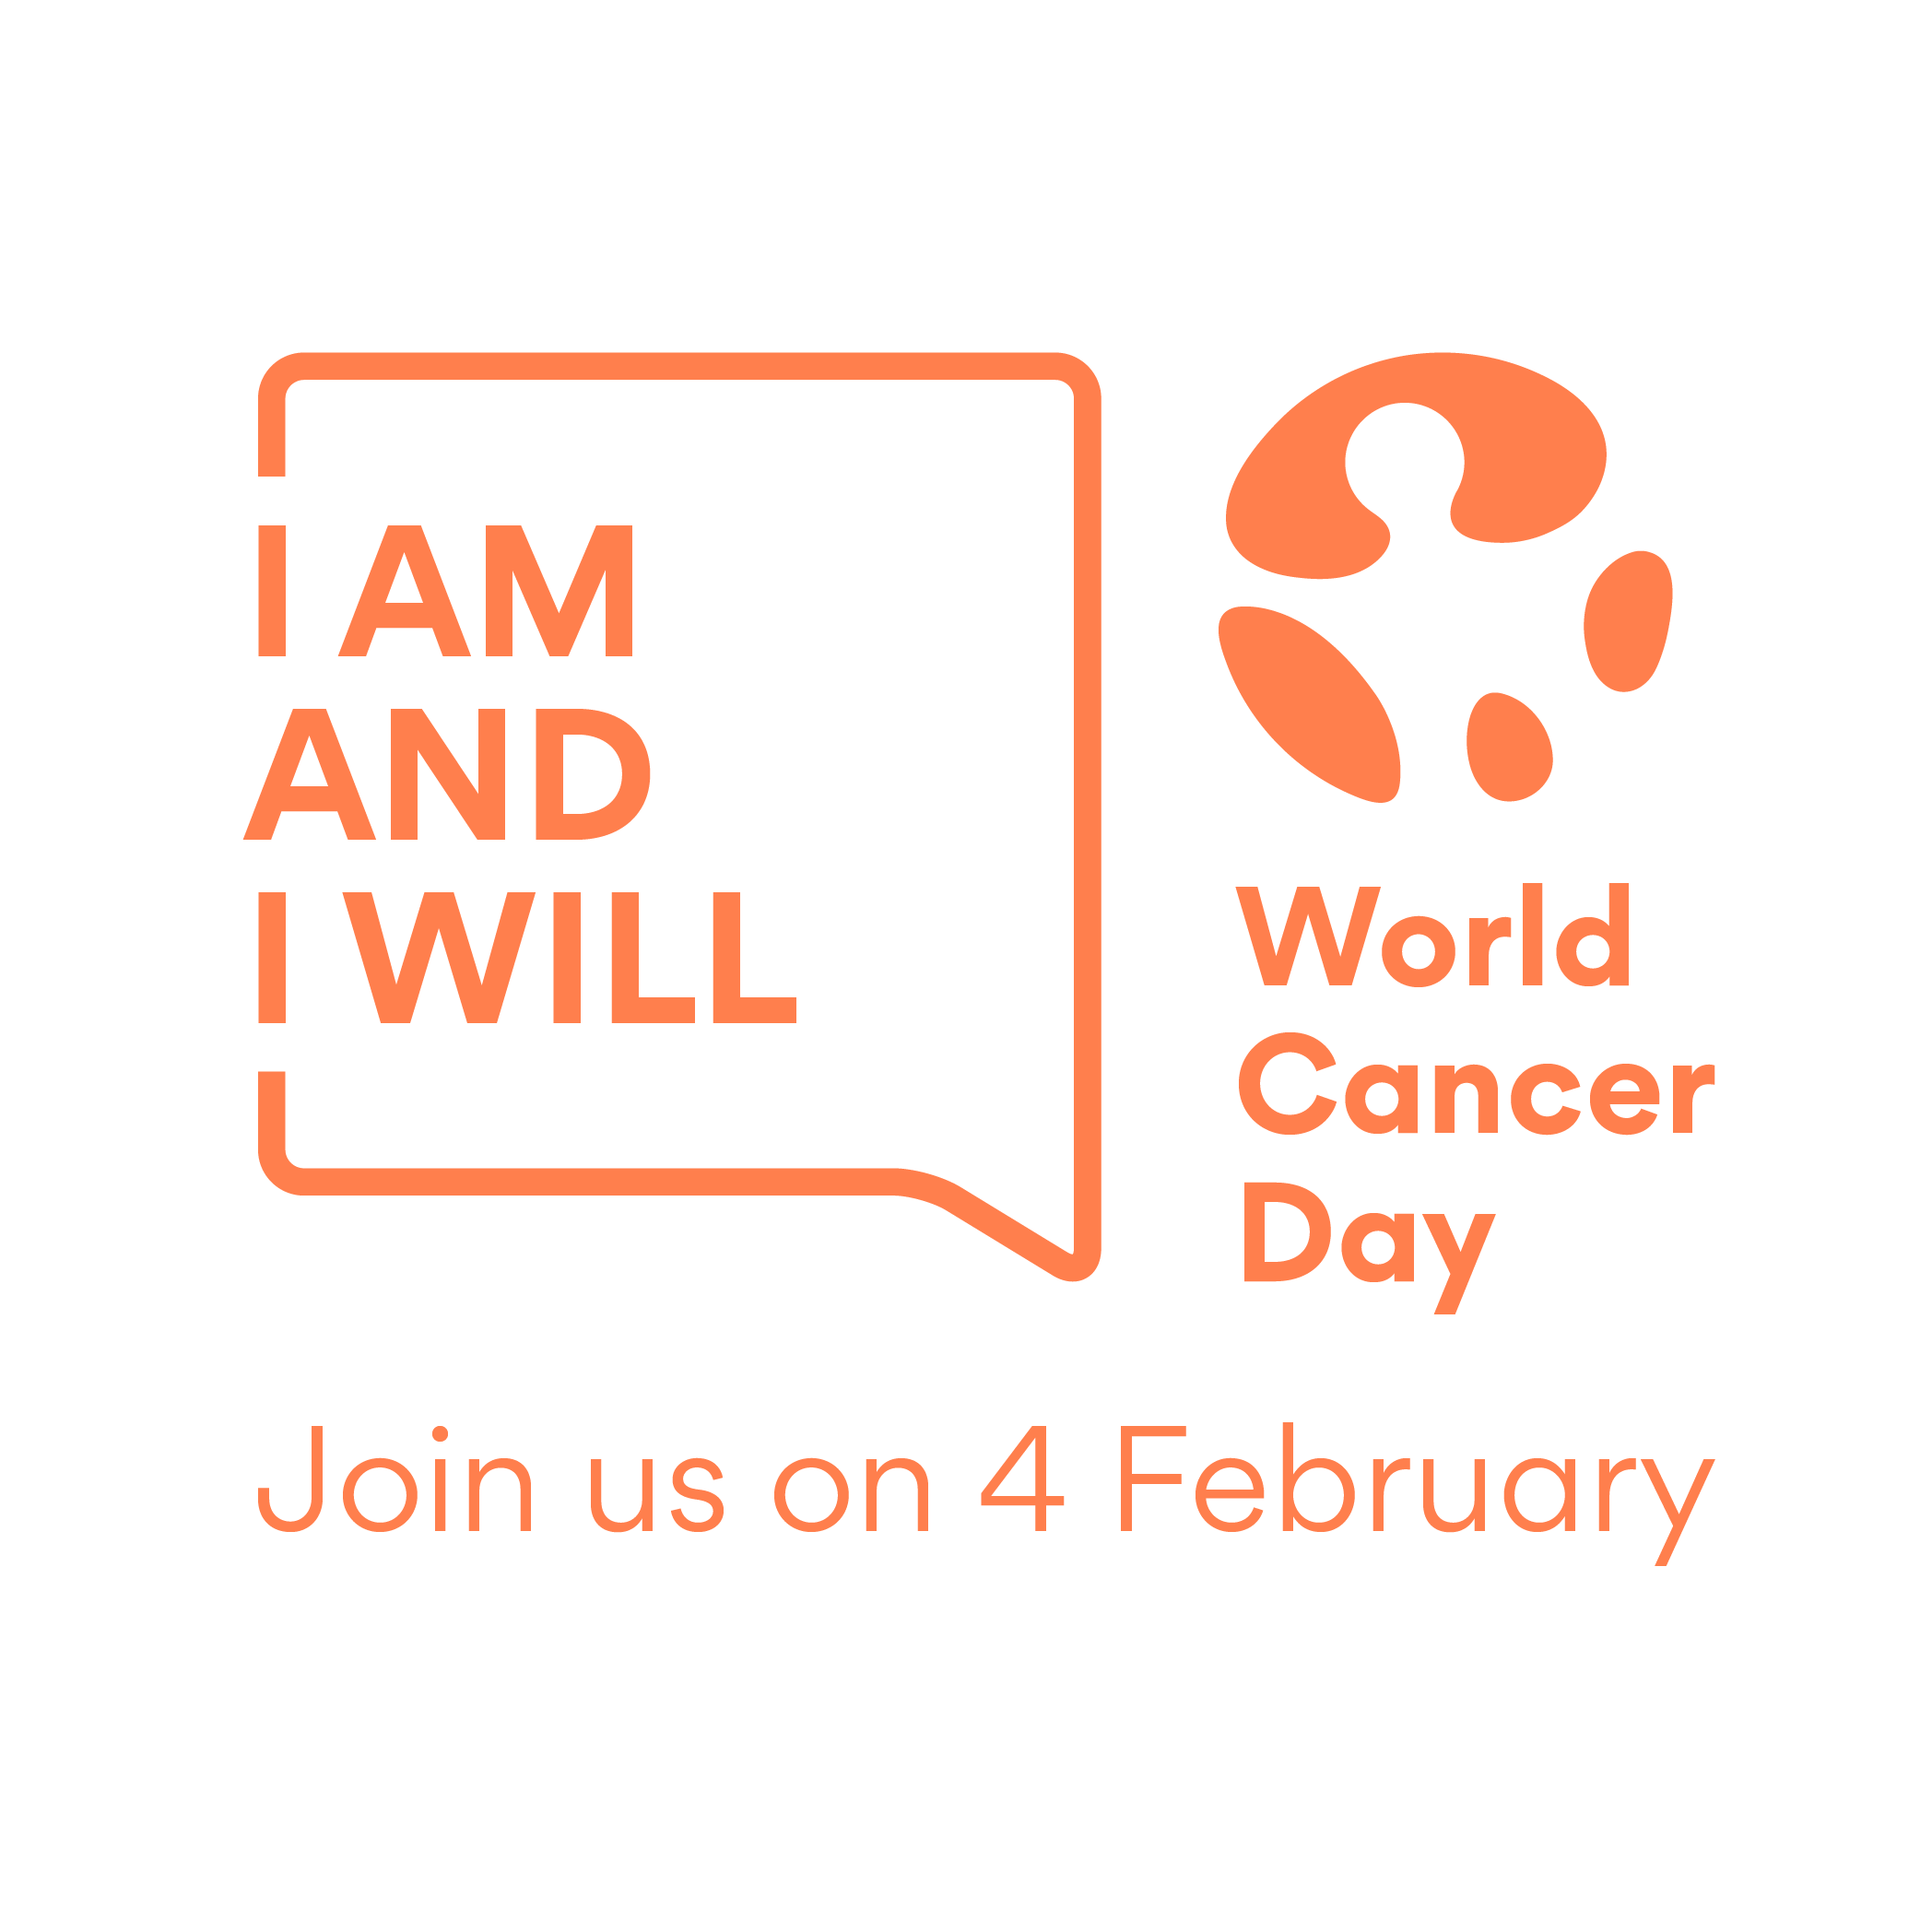 World Cancer Day 2020 Campaign